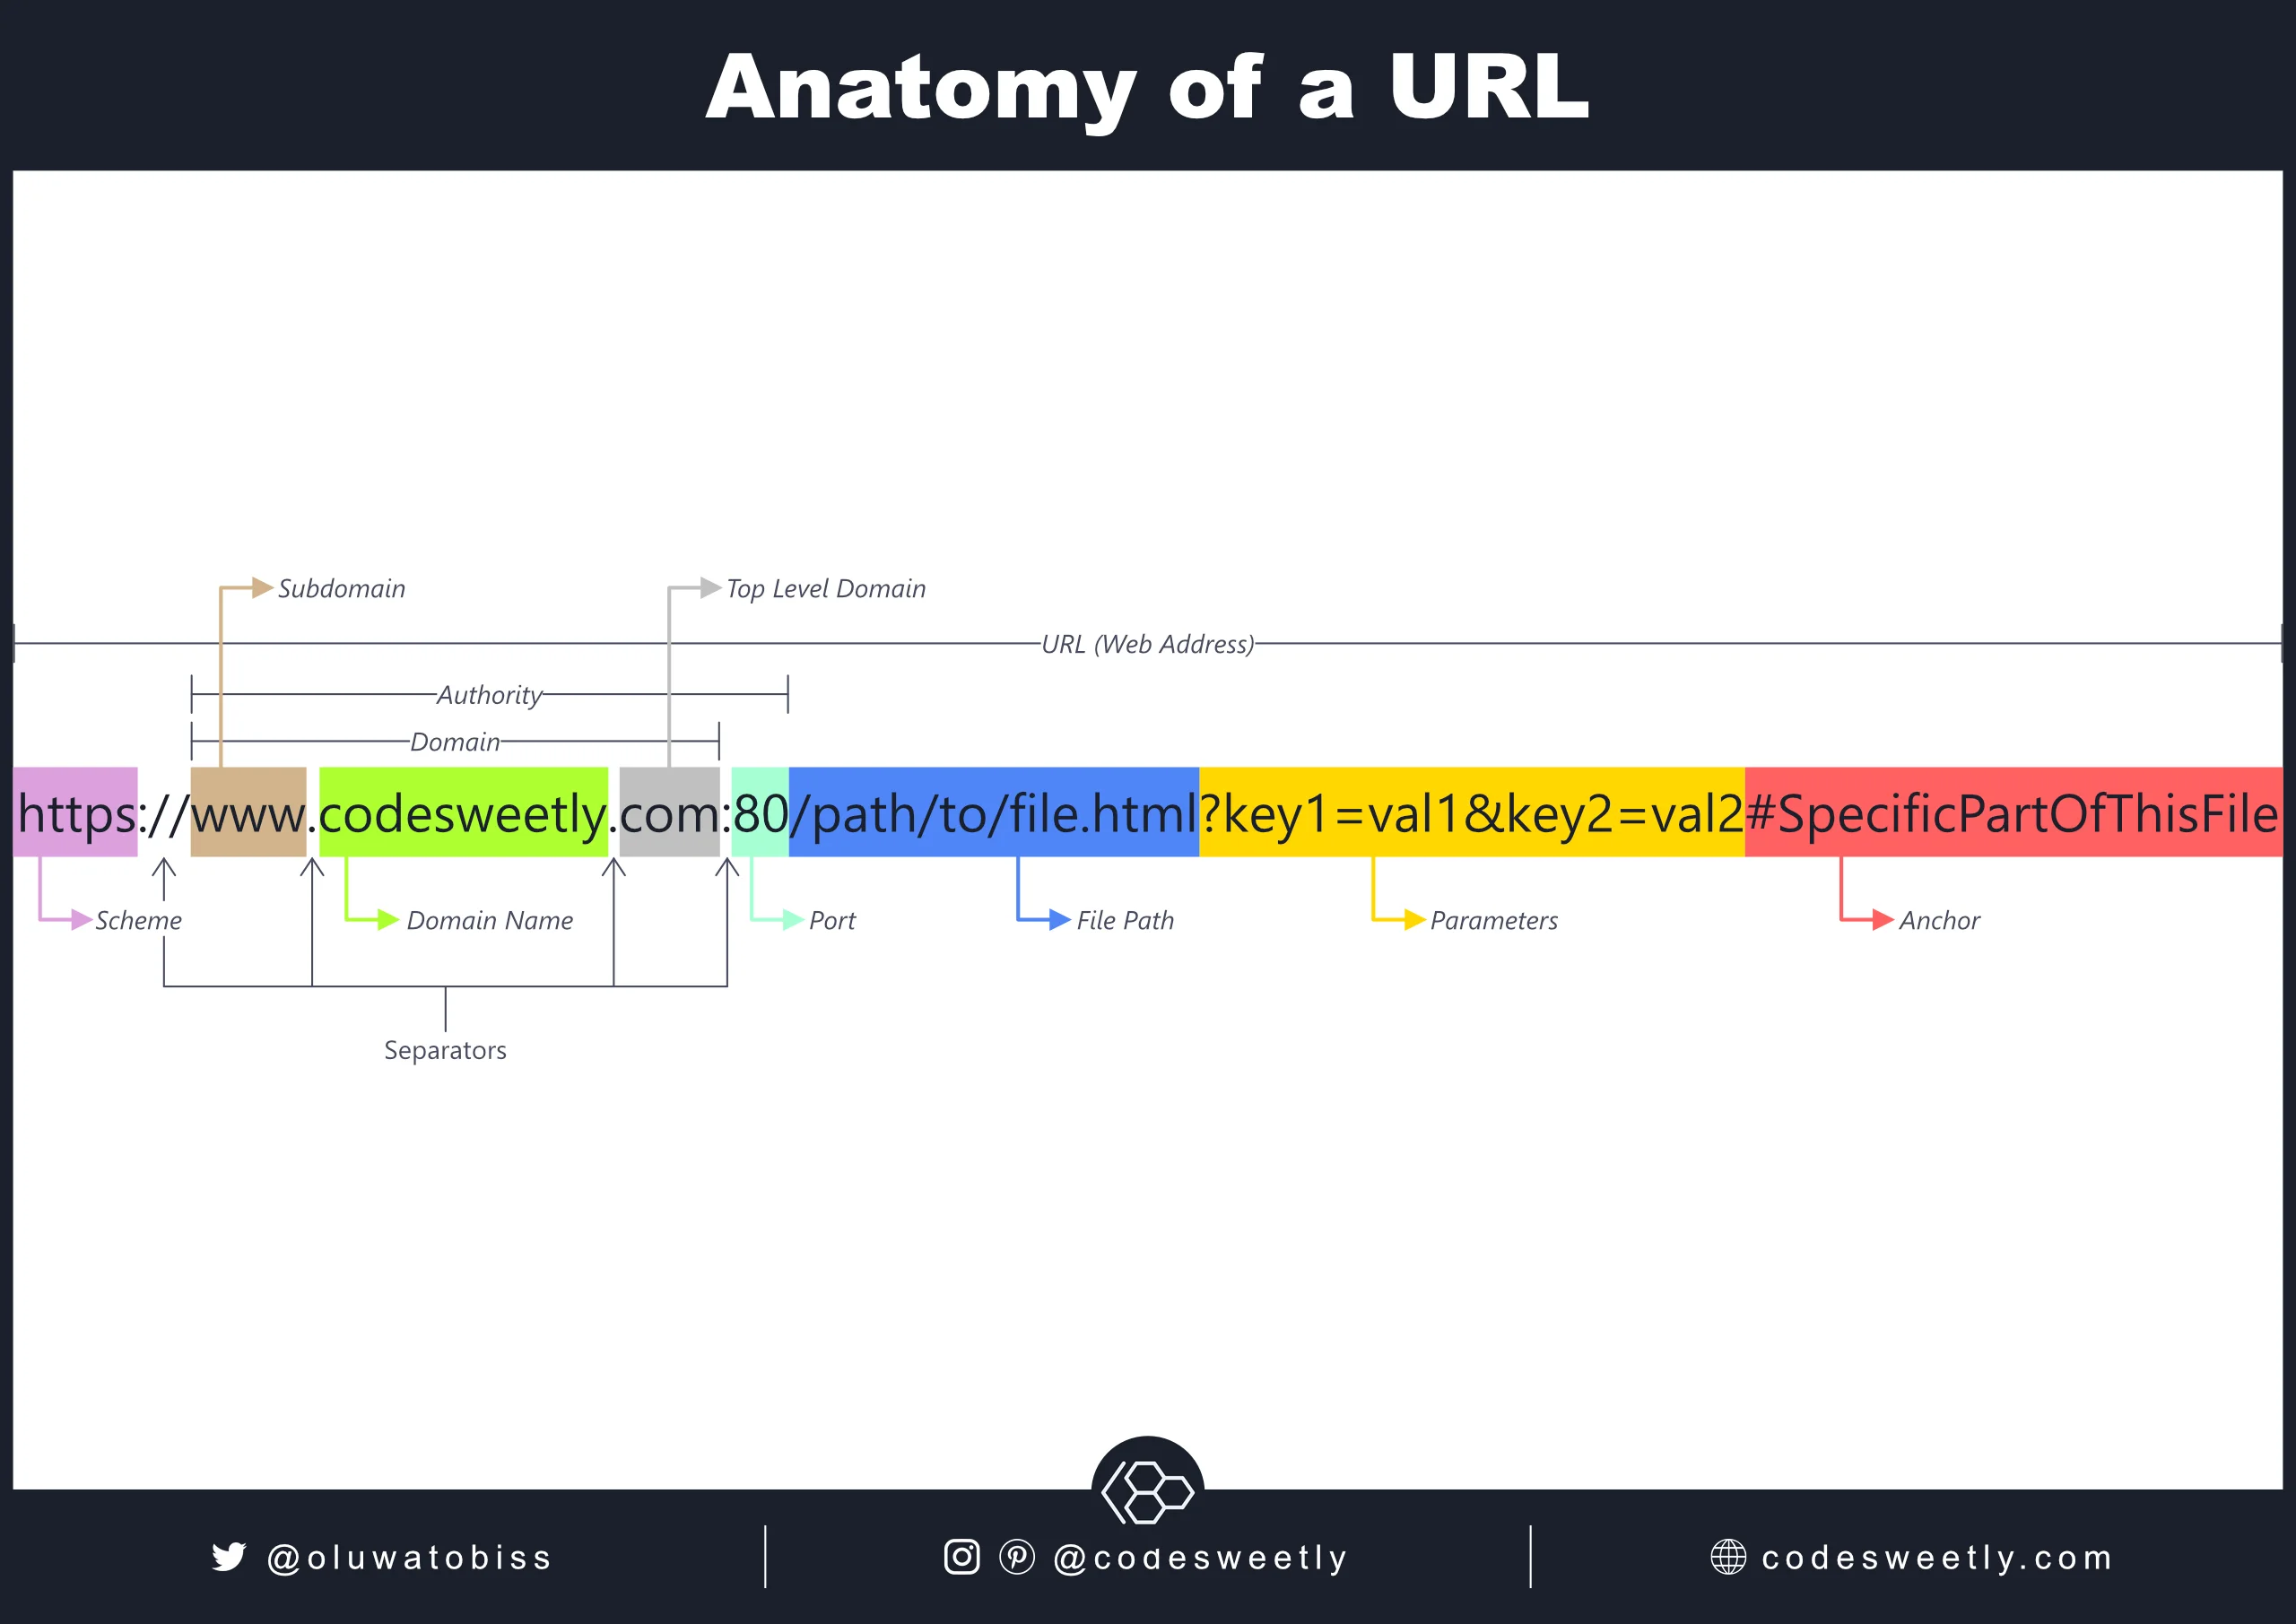 The anatomy of a URL